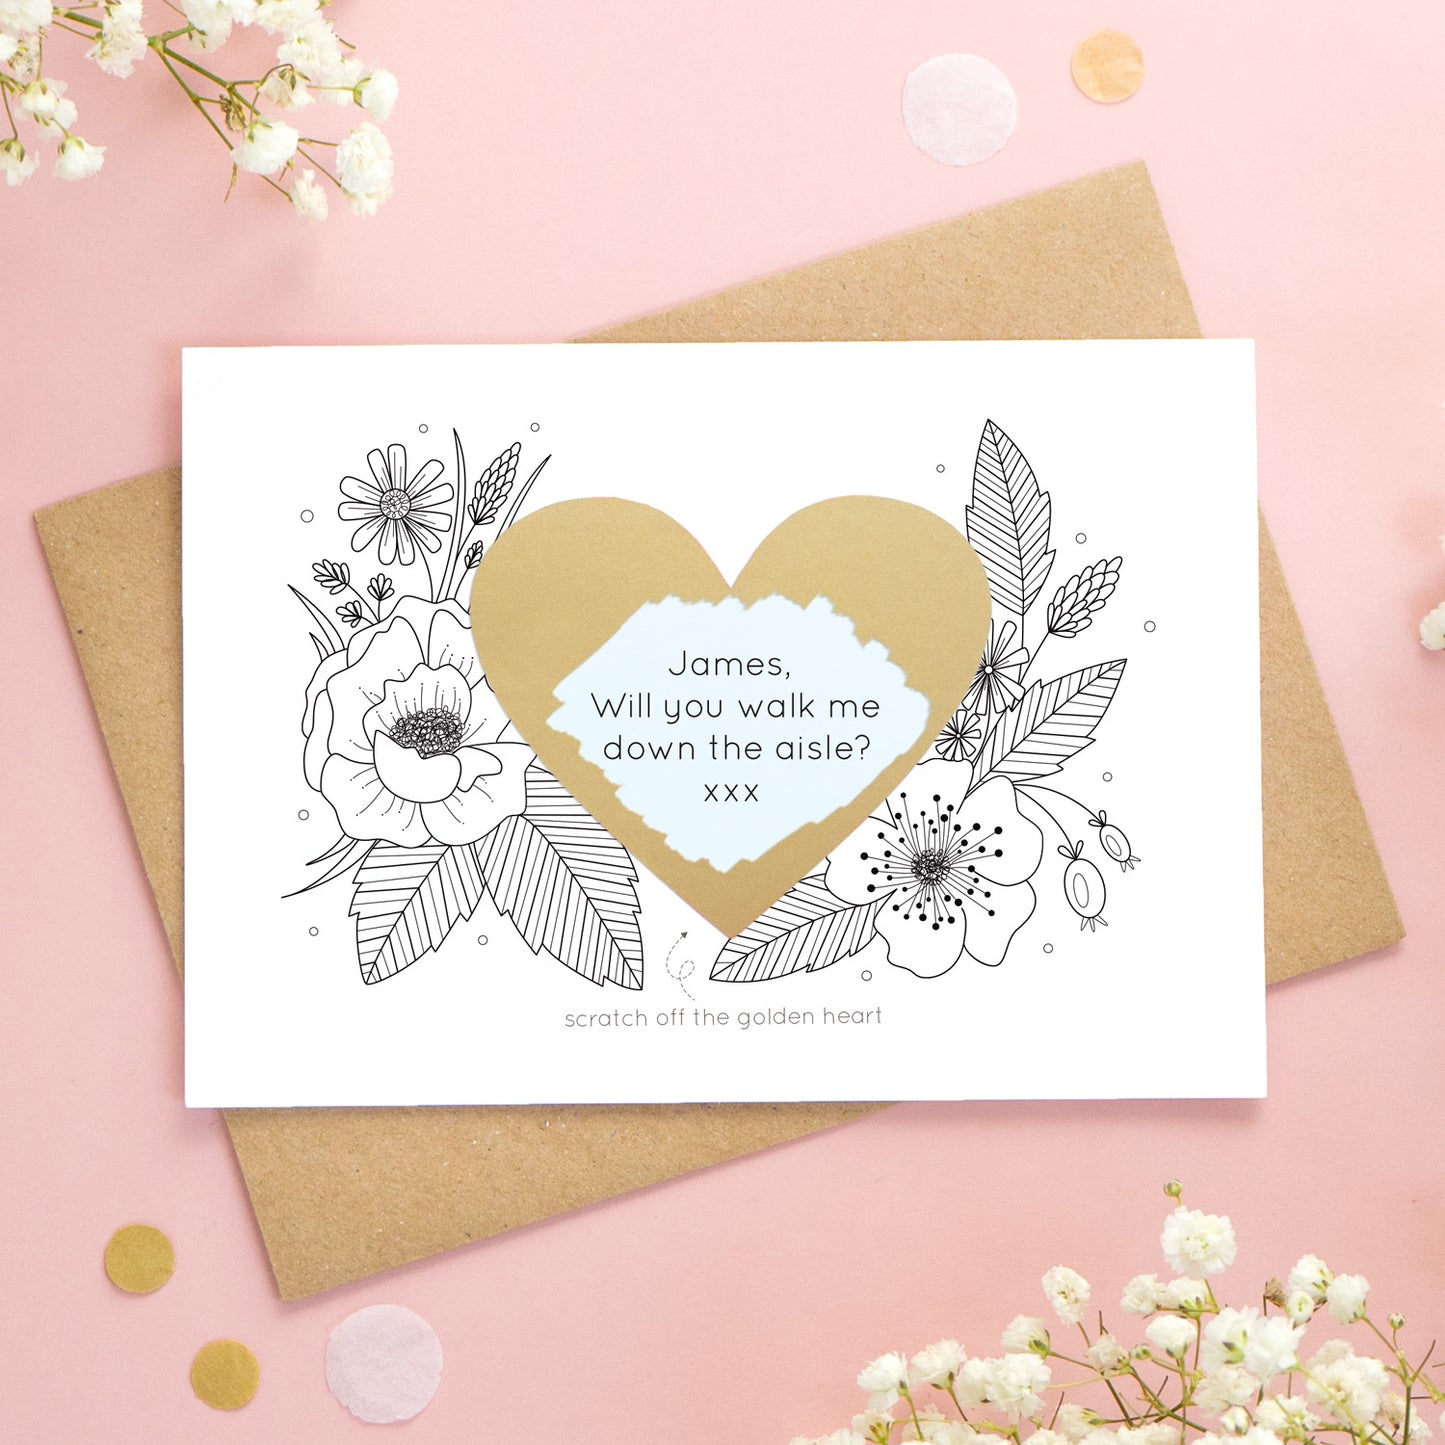 A personalised wedding scratch card shot on a pink background with white flowers. The golden heart has been scratched revealing a blue heart and a proposal asking to be walked down the aisle!